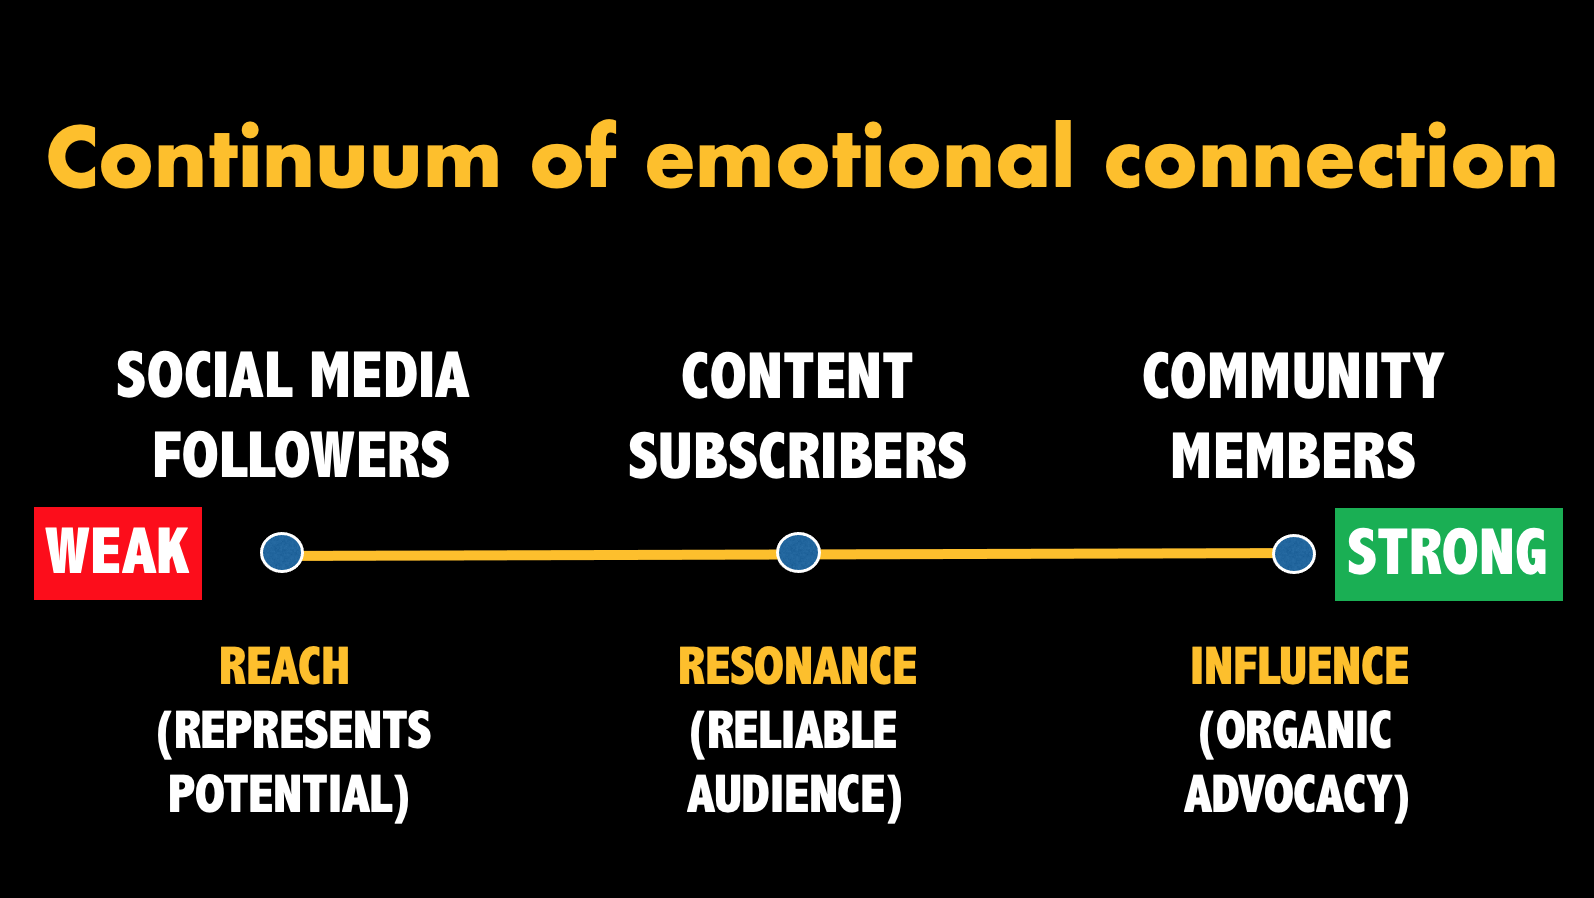 Image of a line bar that depicts the Continuum of Emotional Connection. Weak emotional connection is on the left and strong emotional connection is on the right. Left to right the image has listed, "Social media followers, content subscribers, and community members."